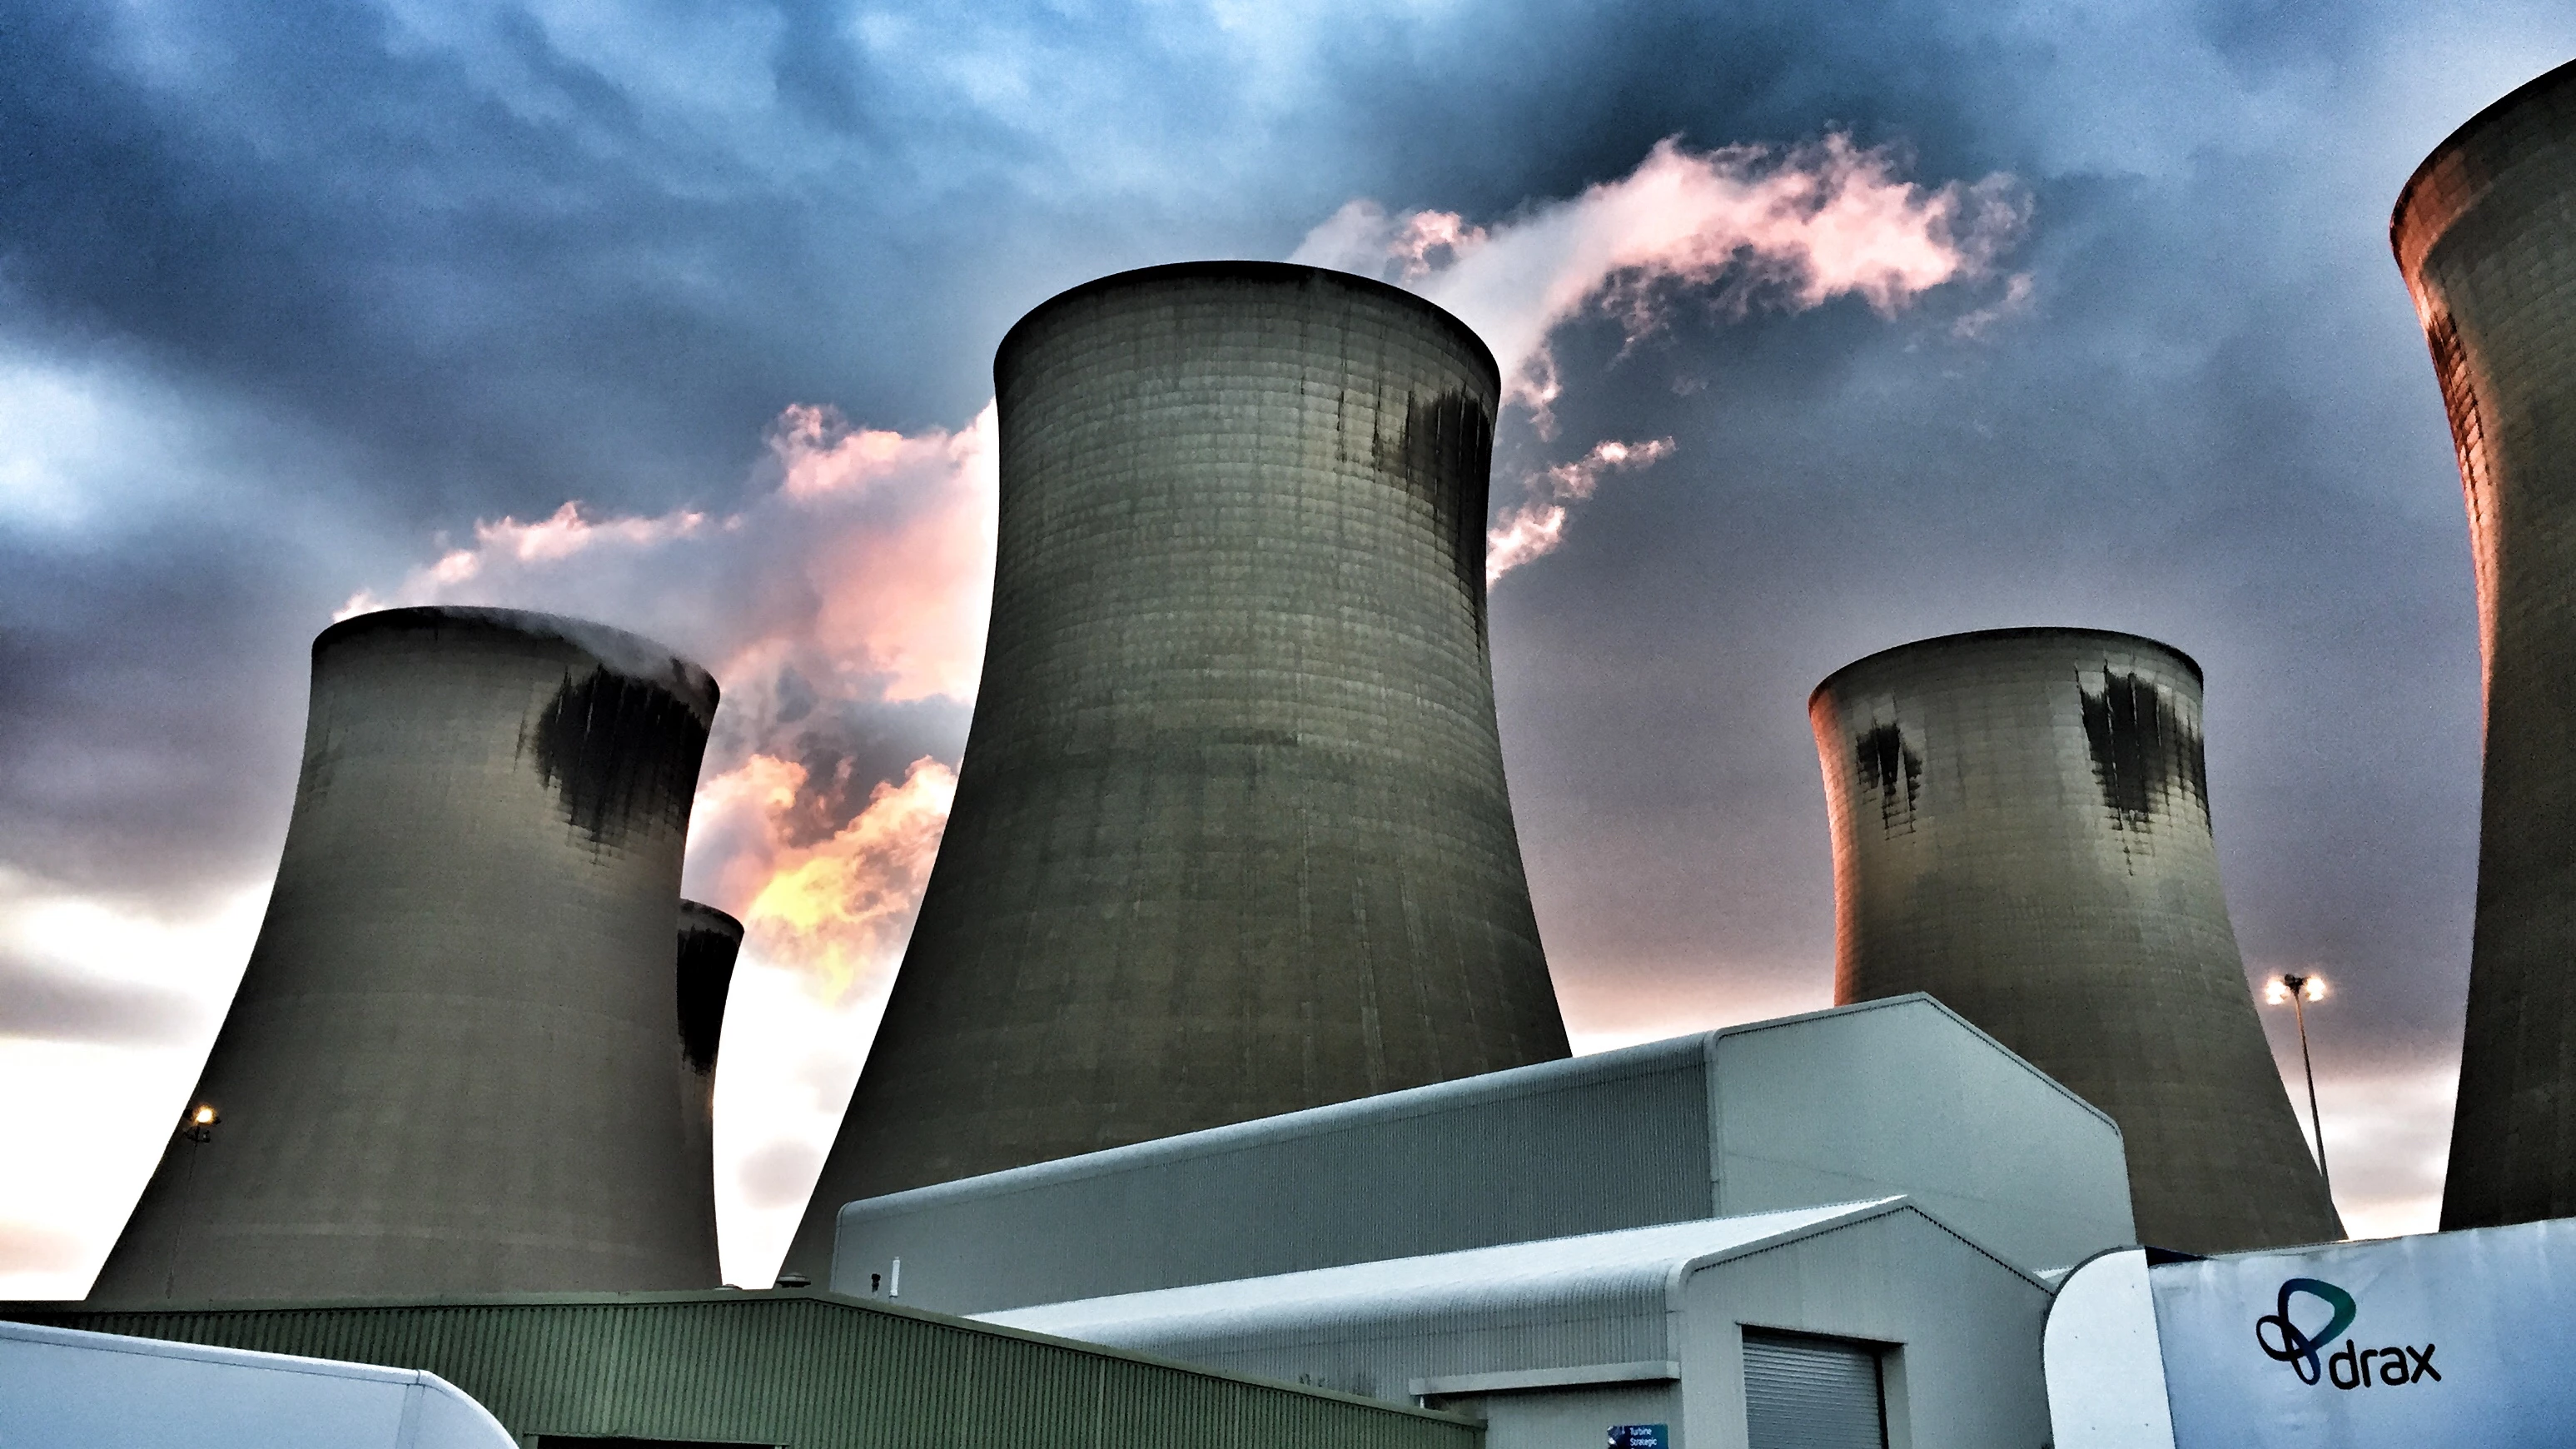 Cooling Towers, Drax Power Station